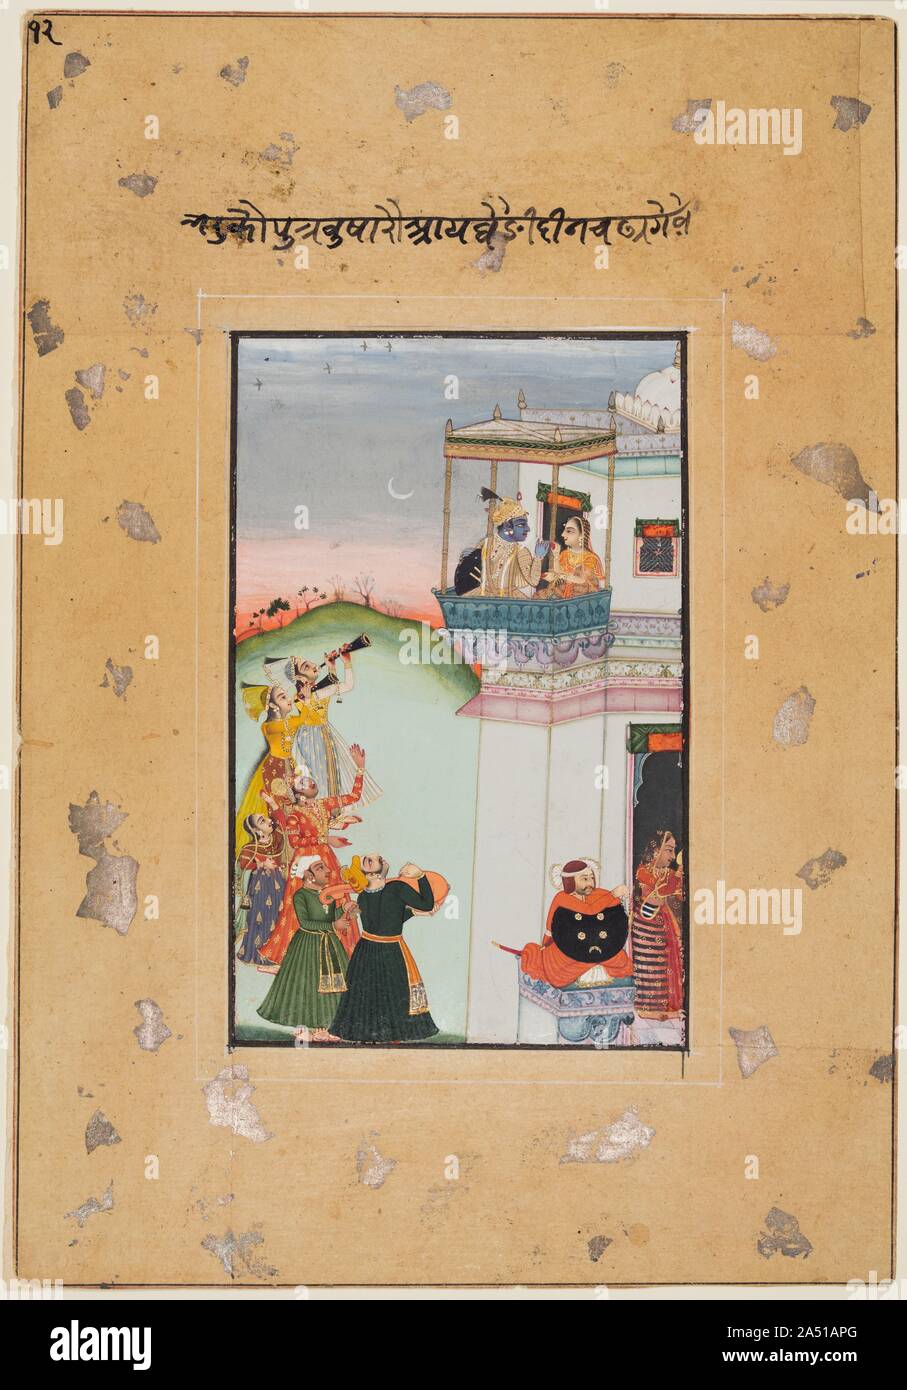 Krishna and Consort on a Palace Balcony with Musicians: Vukharo Ragaputra of Bhairav, from the &quot;Boston Ragamala&quot;, 1770-75. The mood of this scene is joyous, as the blue-skinned god Krishna sits with his beloved in a high covered balcony. Set during the first moments of dawn, the sun rises over the horizon, and the new moon begins to fade in the morning light. Below, exuberant musicians blow horns and clap time. One man in front plays the cymbals next to the open-mouthed singer on a lute-like instrument. With the door wide open, the guard sits relaxed and unworried, counting the beads Stock Photo